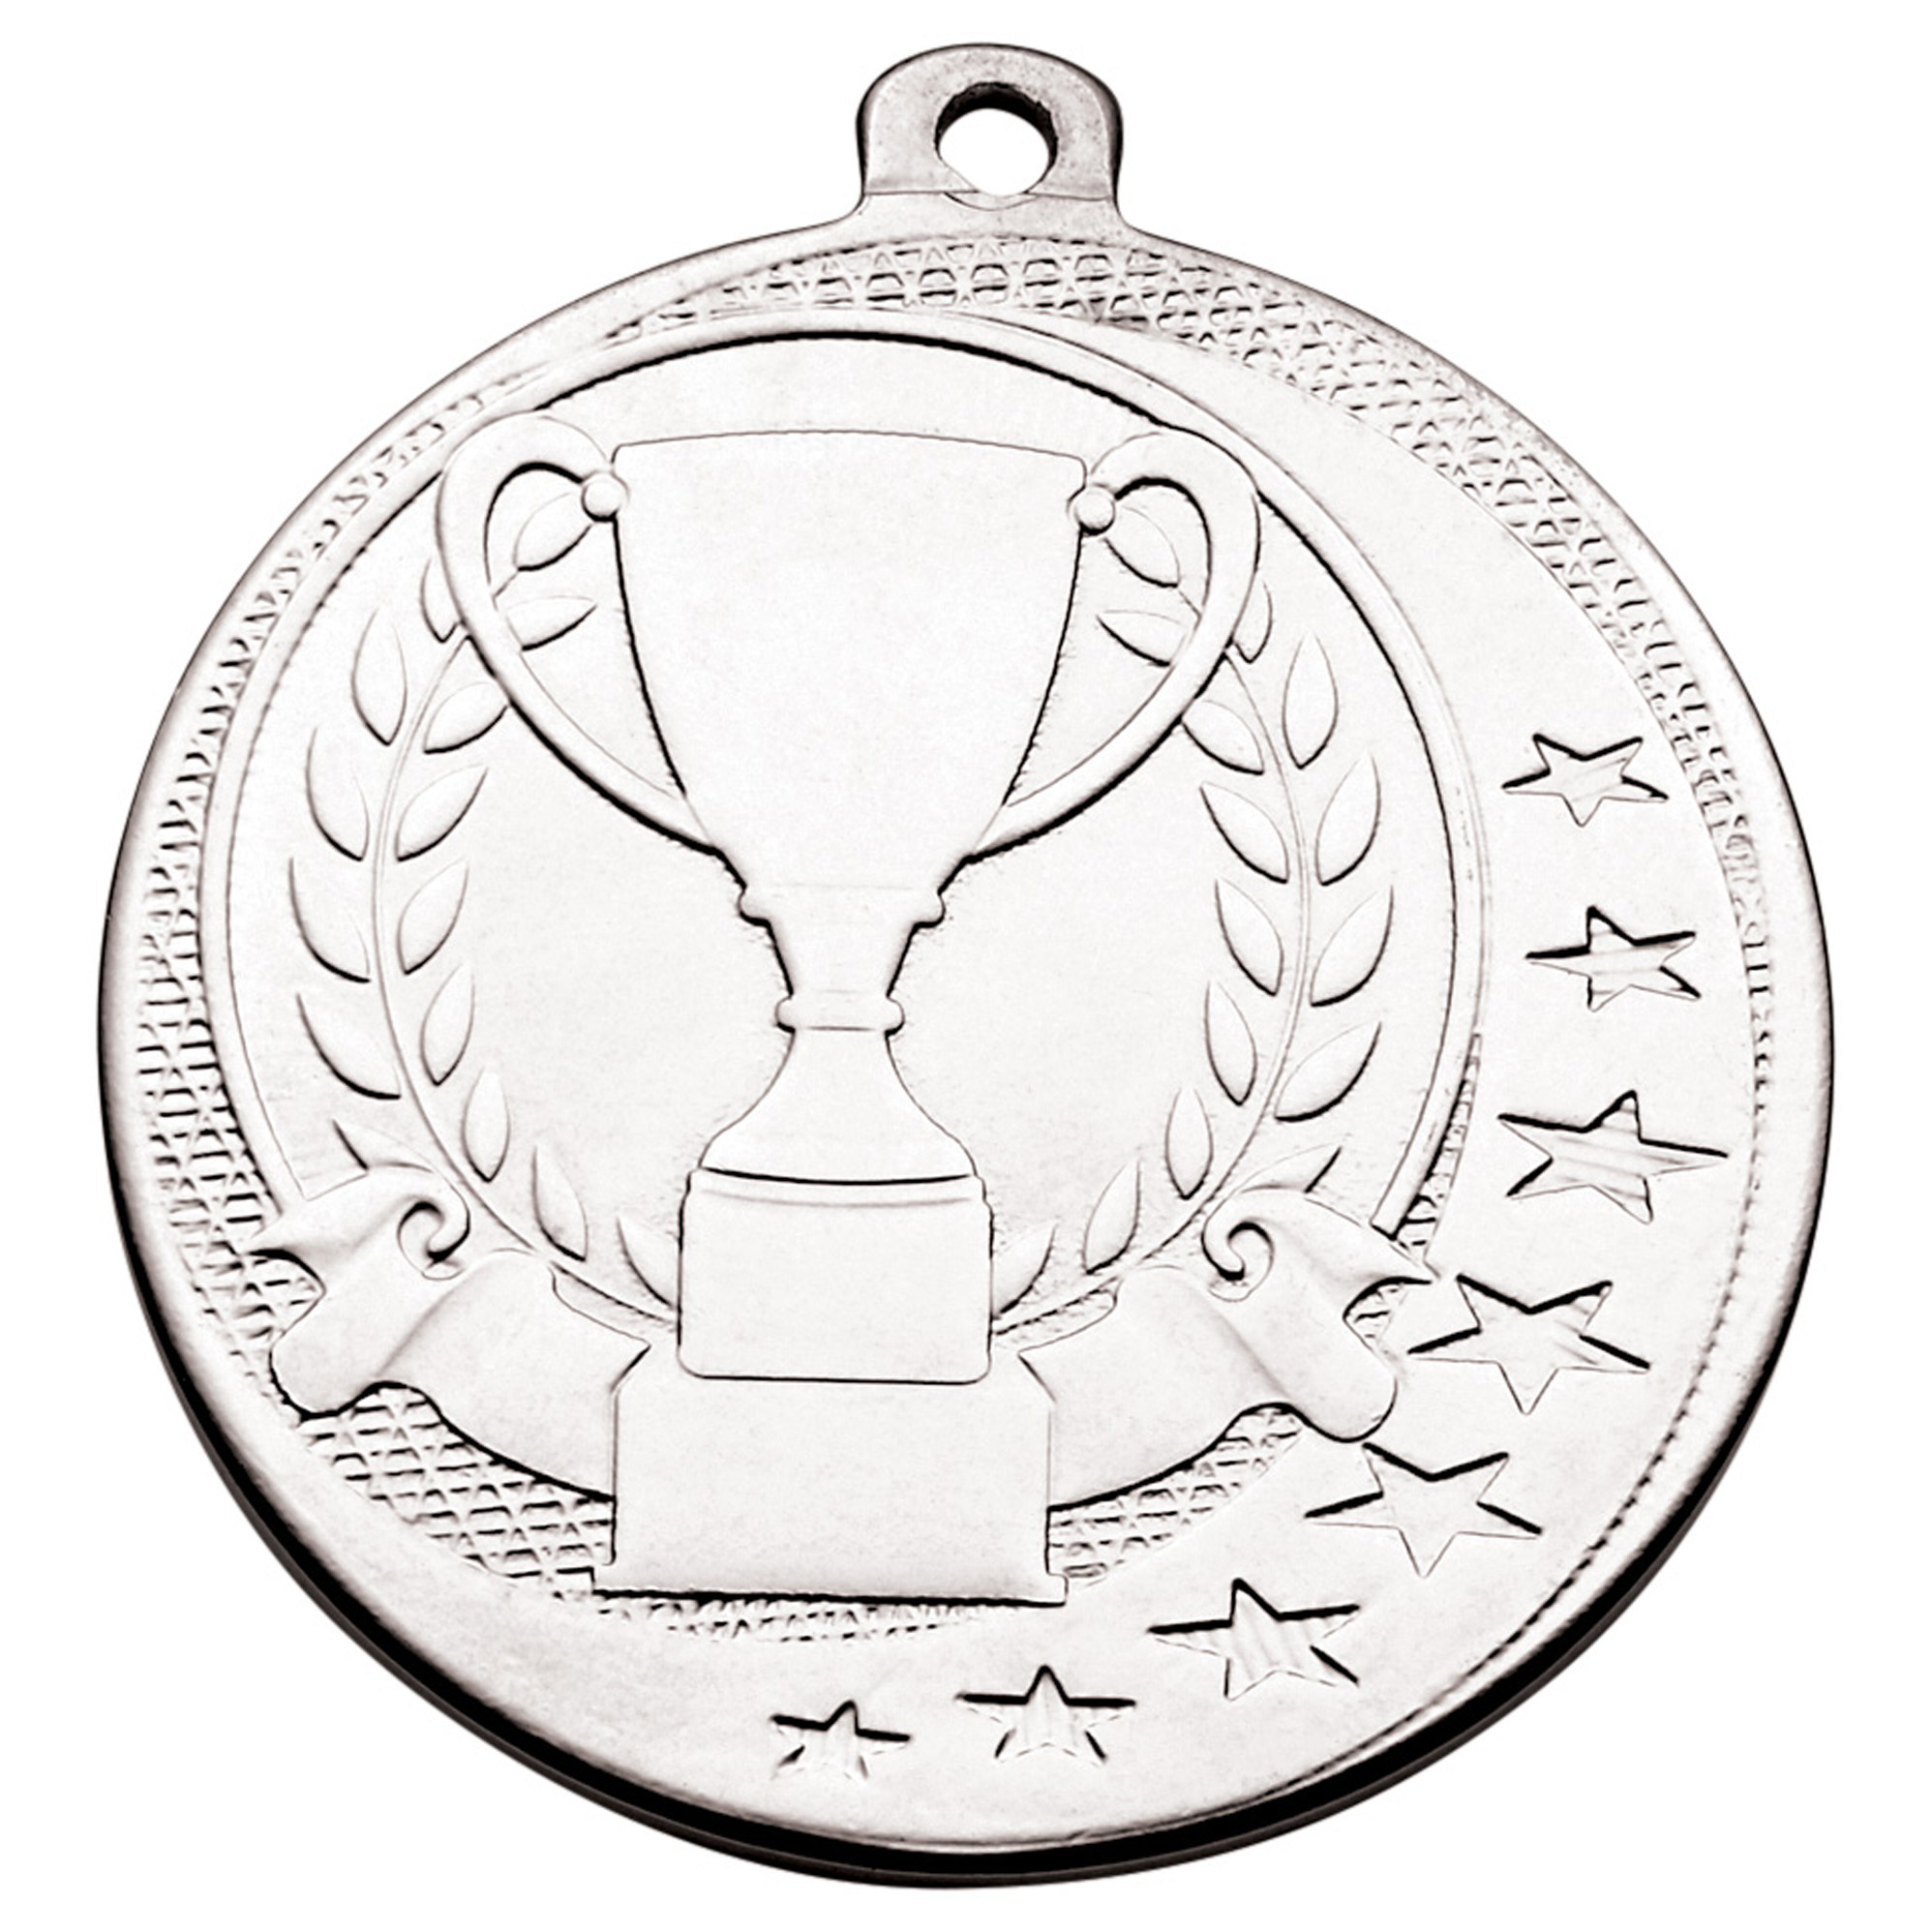 50MM SILVER CUP MEDAL